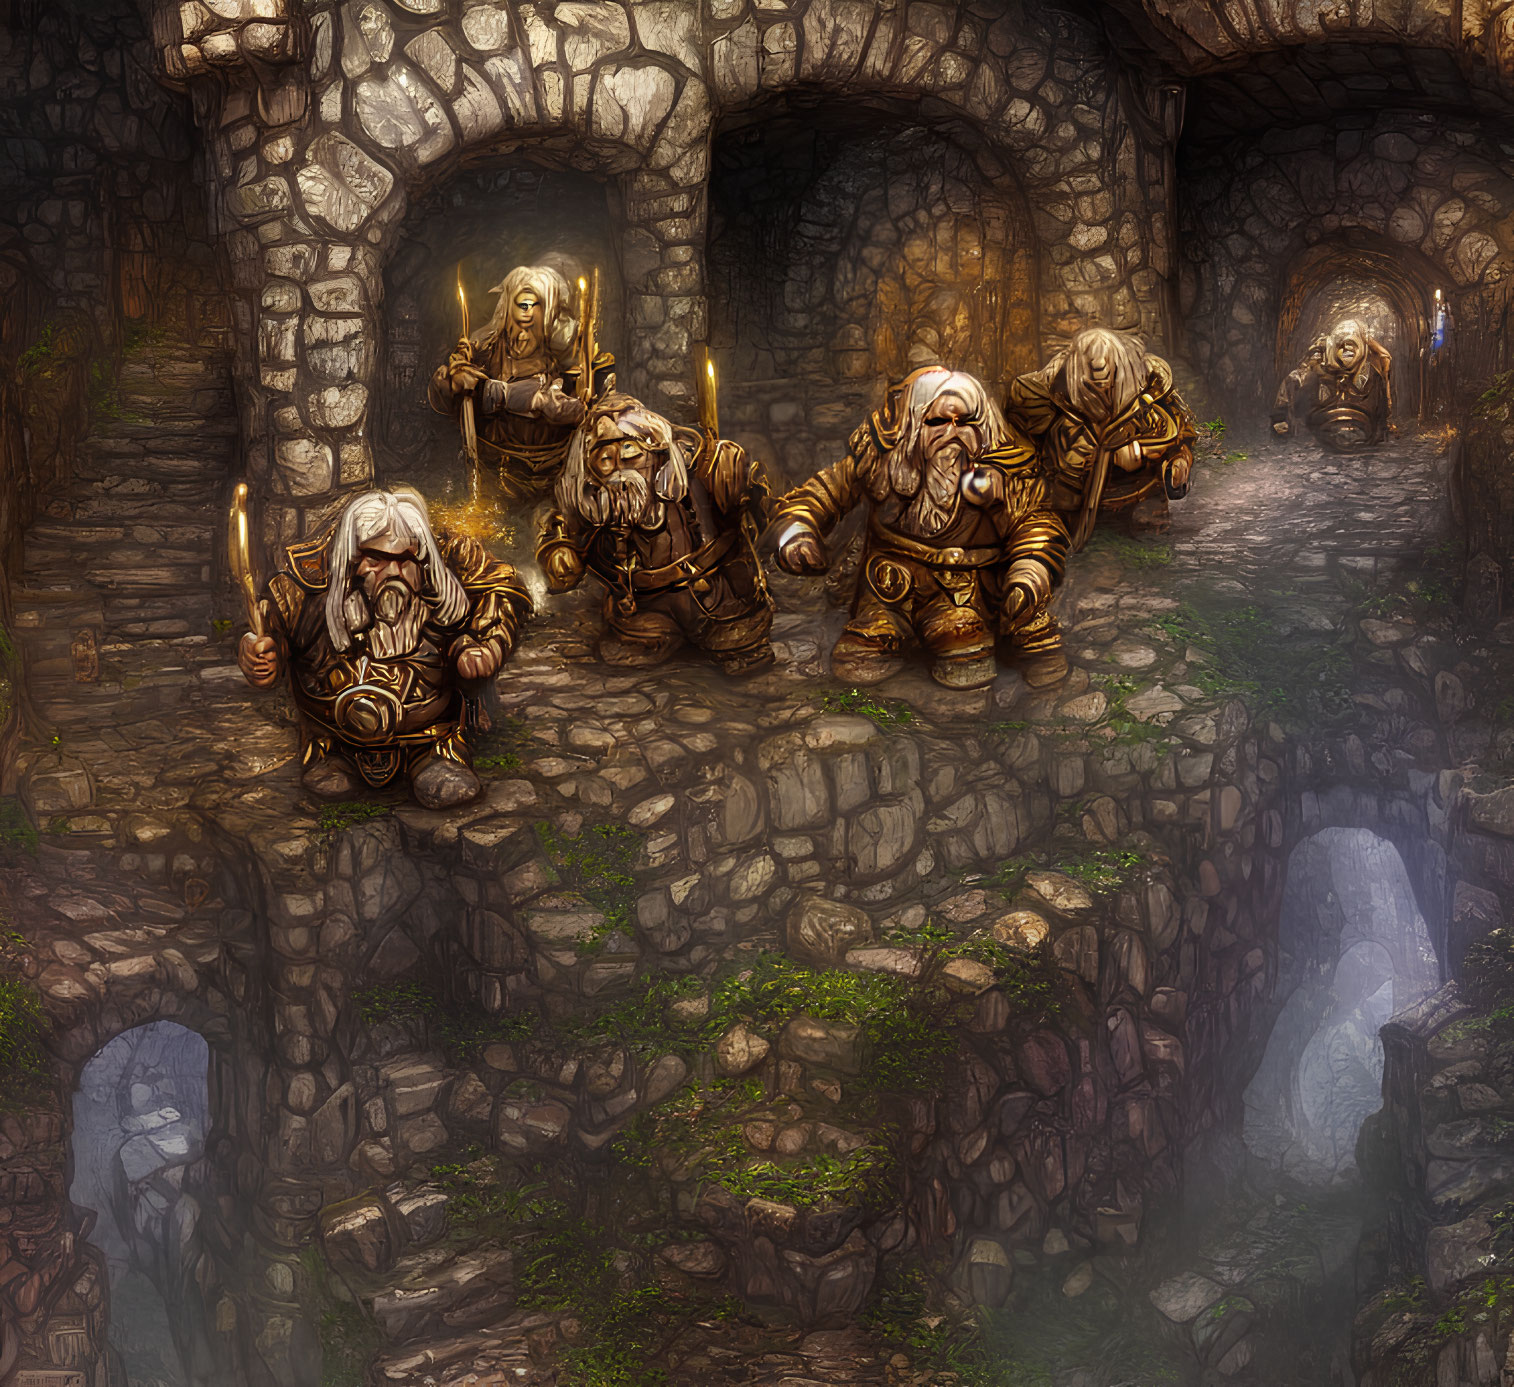 Fantasy scene: Armored dwarves with axes in torch-lit stone hallway